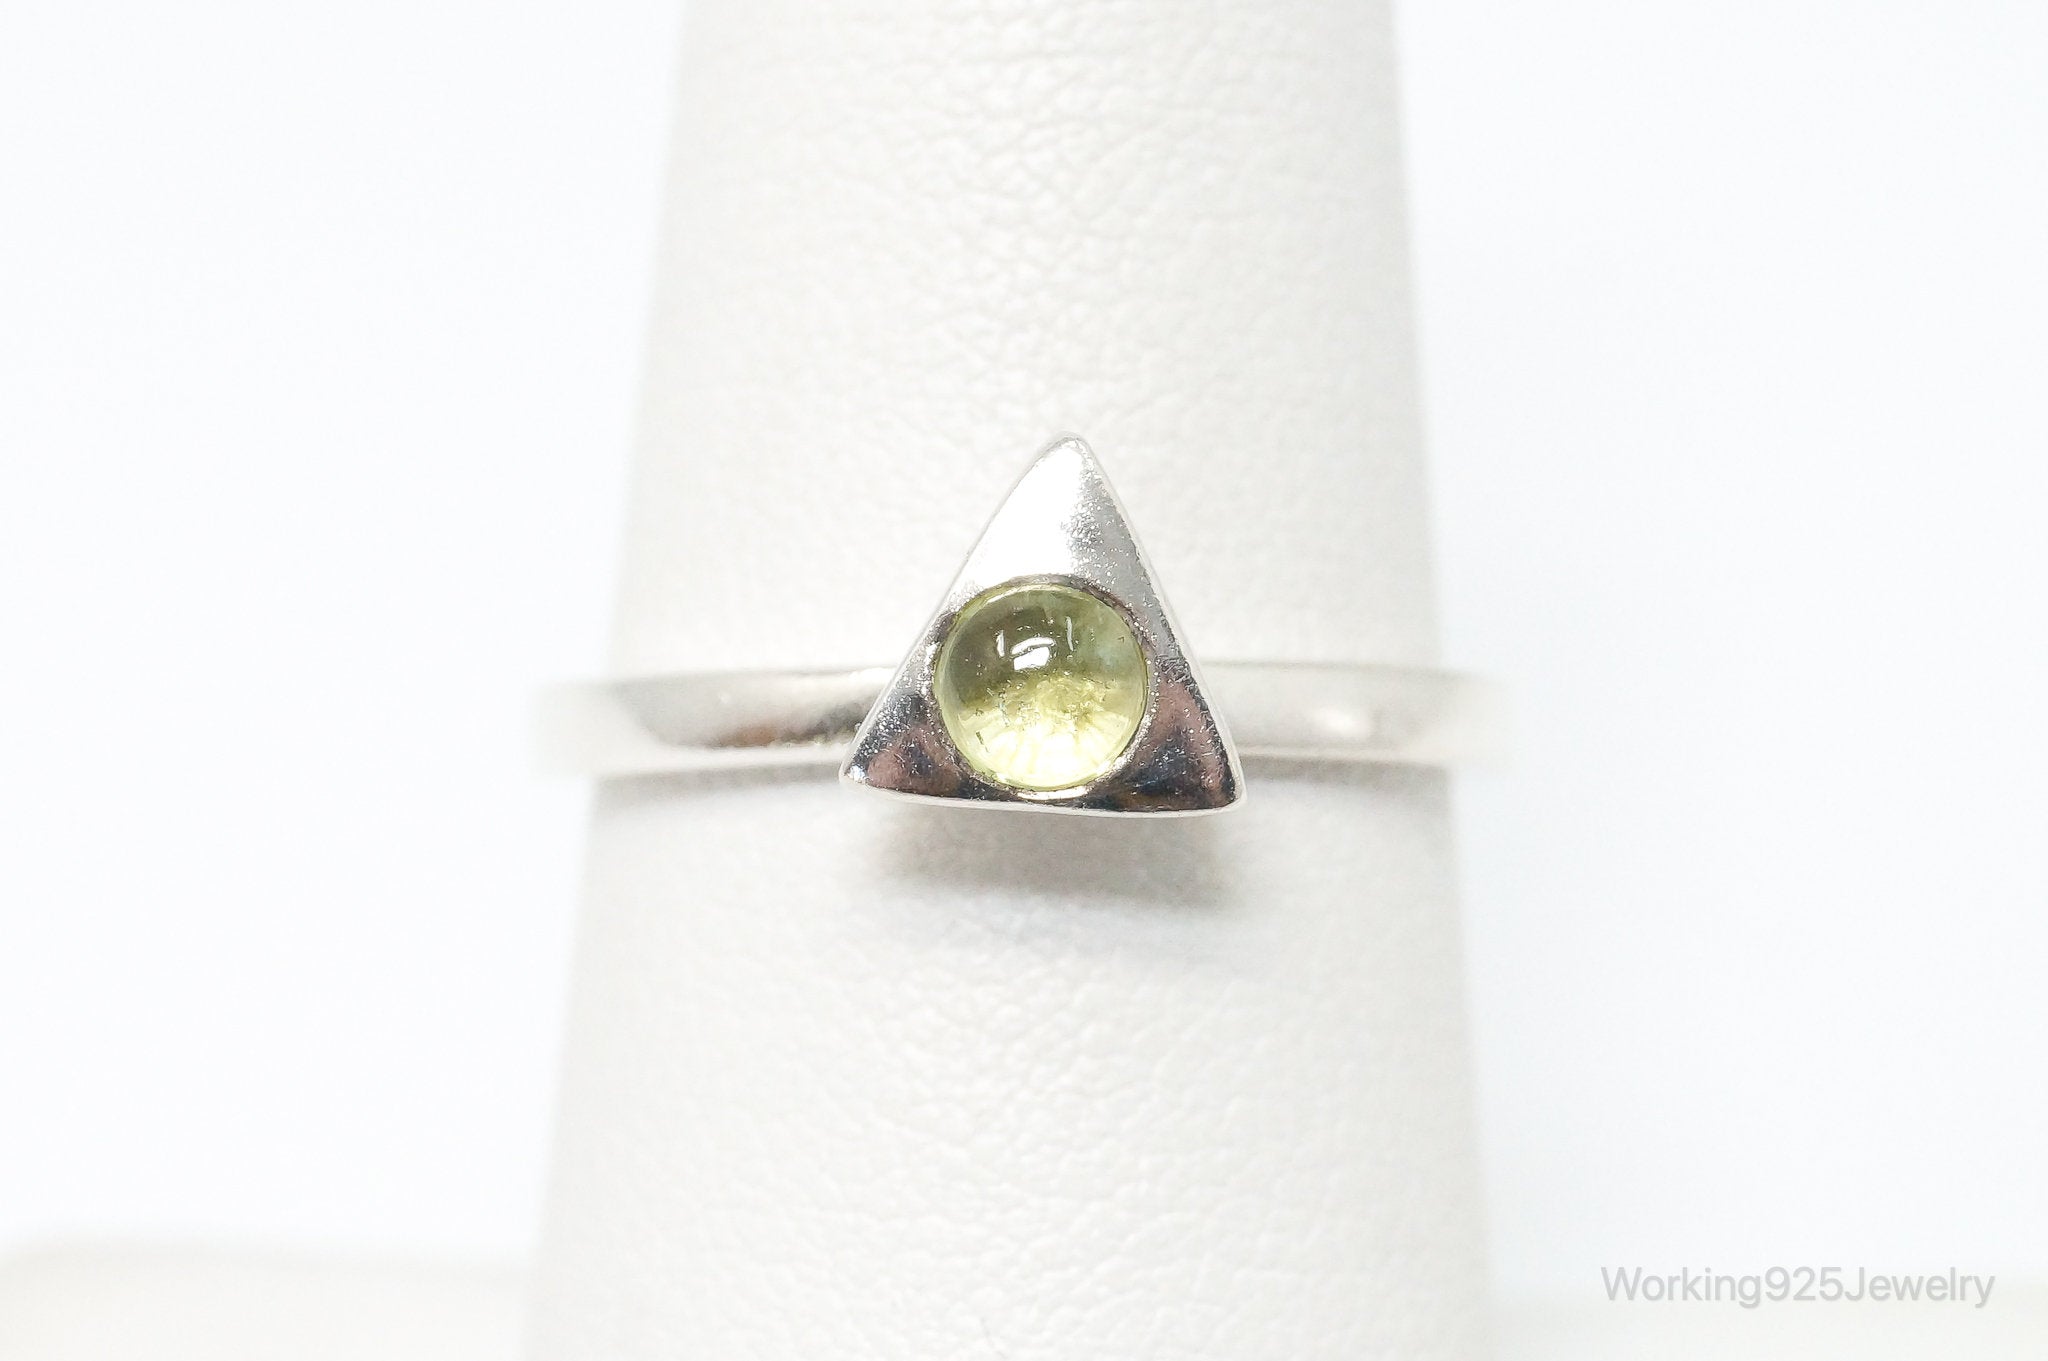 Vintage Peridot Sterling Silver Ring - Size 7